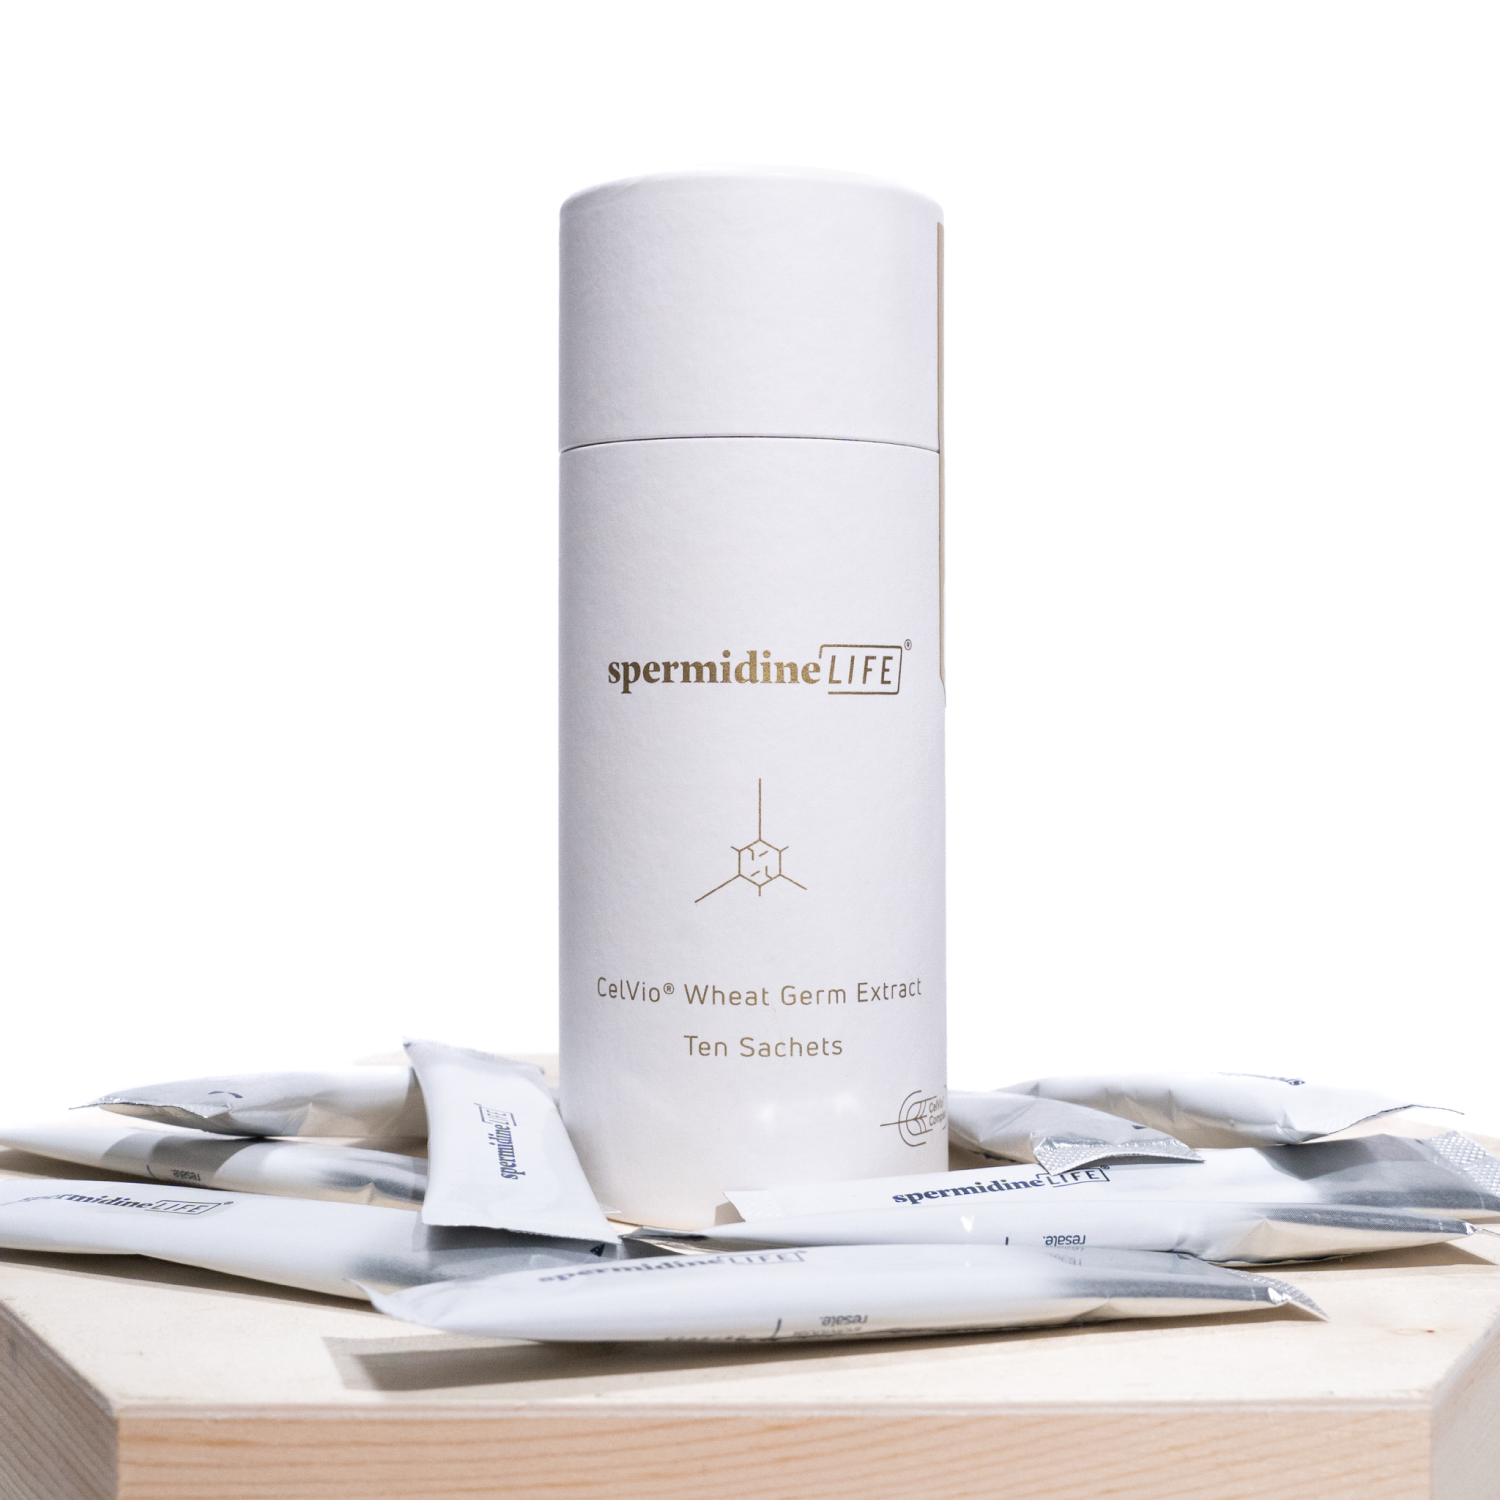 A bottle of spermidineLIFE® Pro+ 4300mg 10 Pack whitening cream sitting on top of a wooden box. (Brand Name: Longevity Labs, Inc)